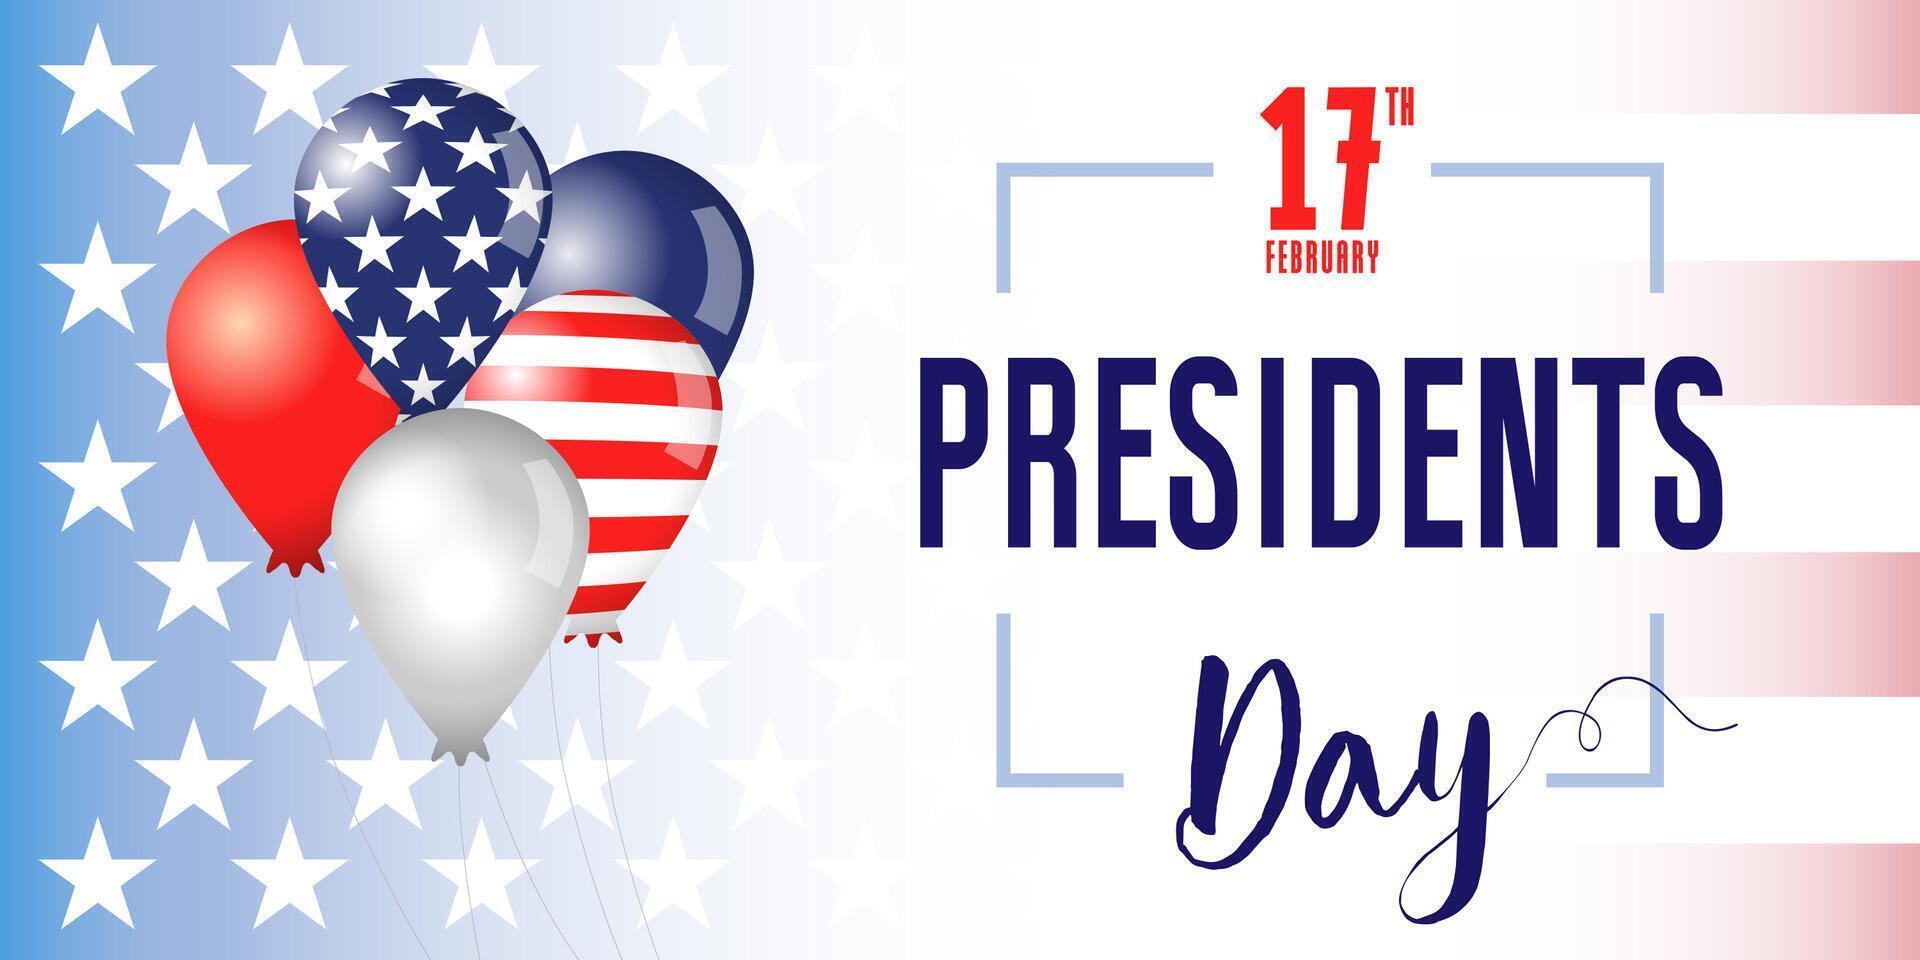 Happy President's Day USA greeting card design vector